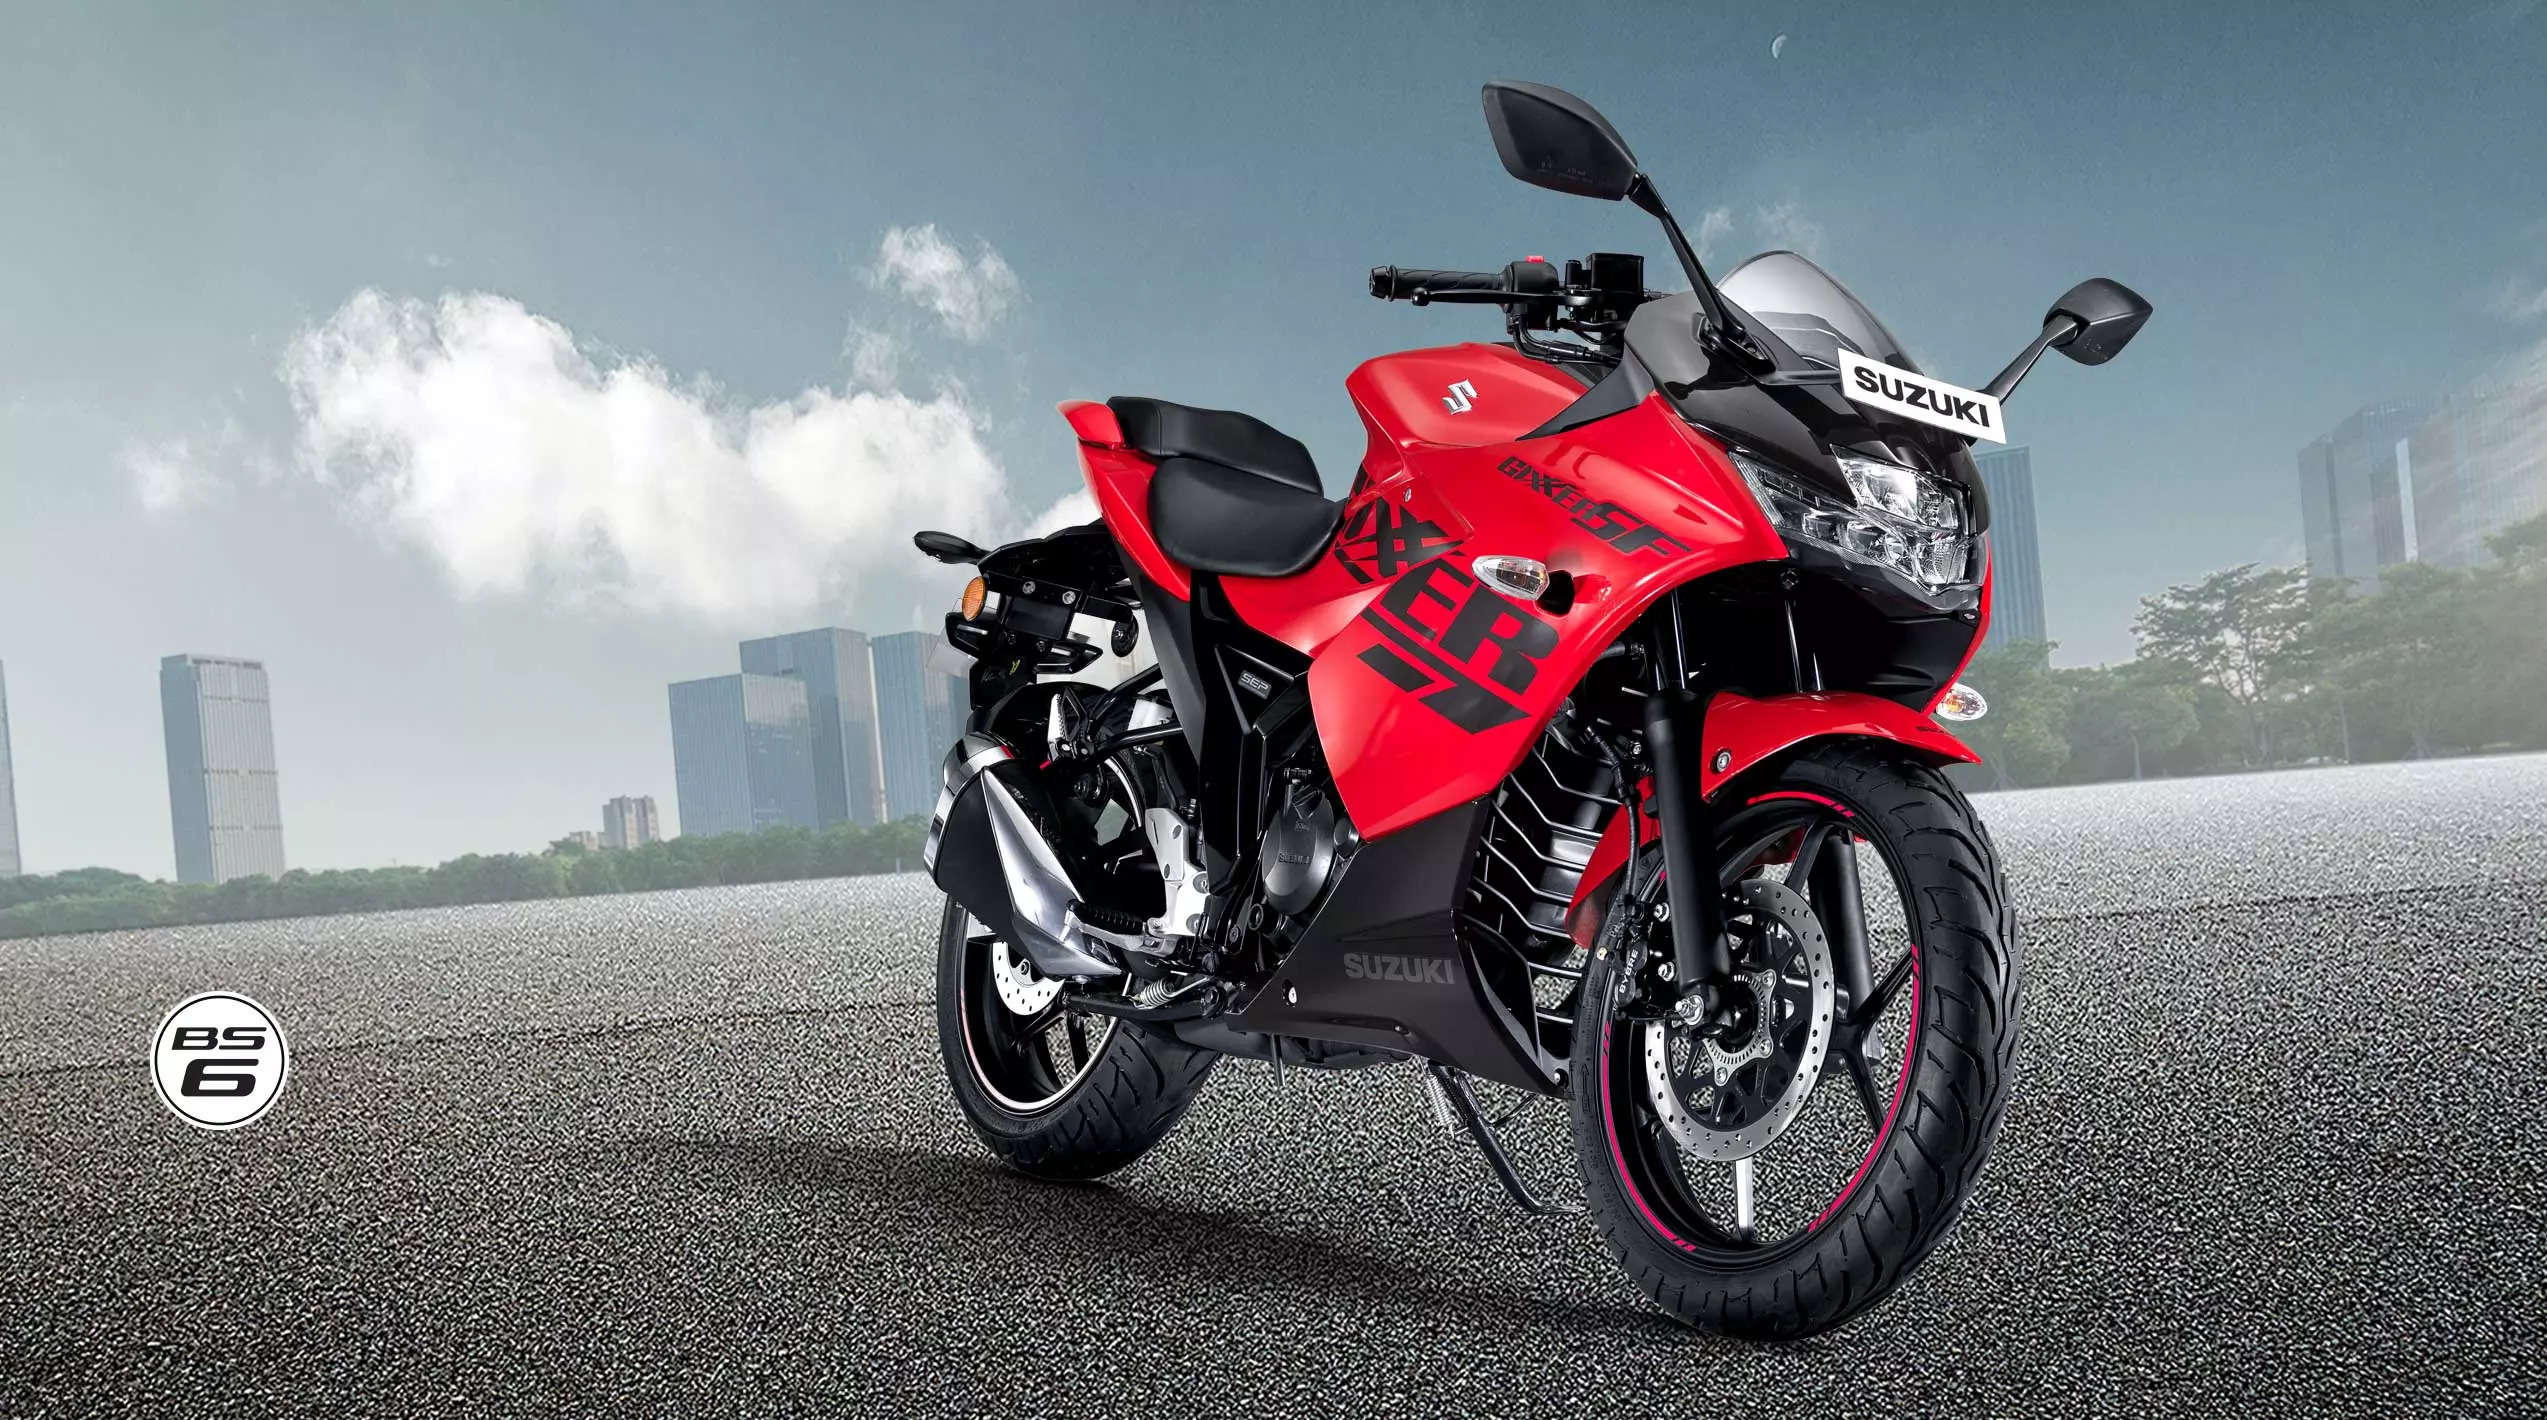 Suzuki Motorcycle India sells 76,230 two-wheelers in July